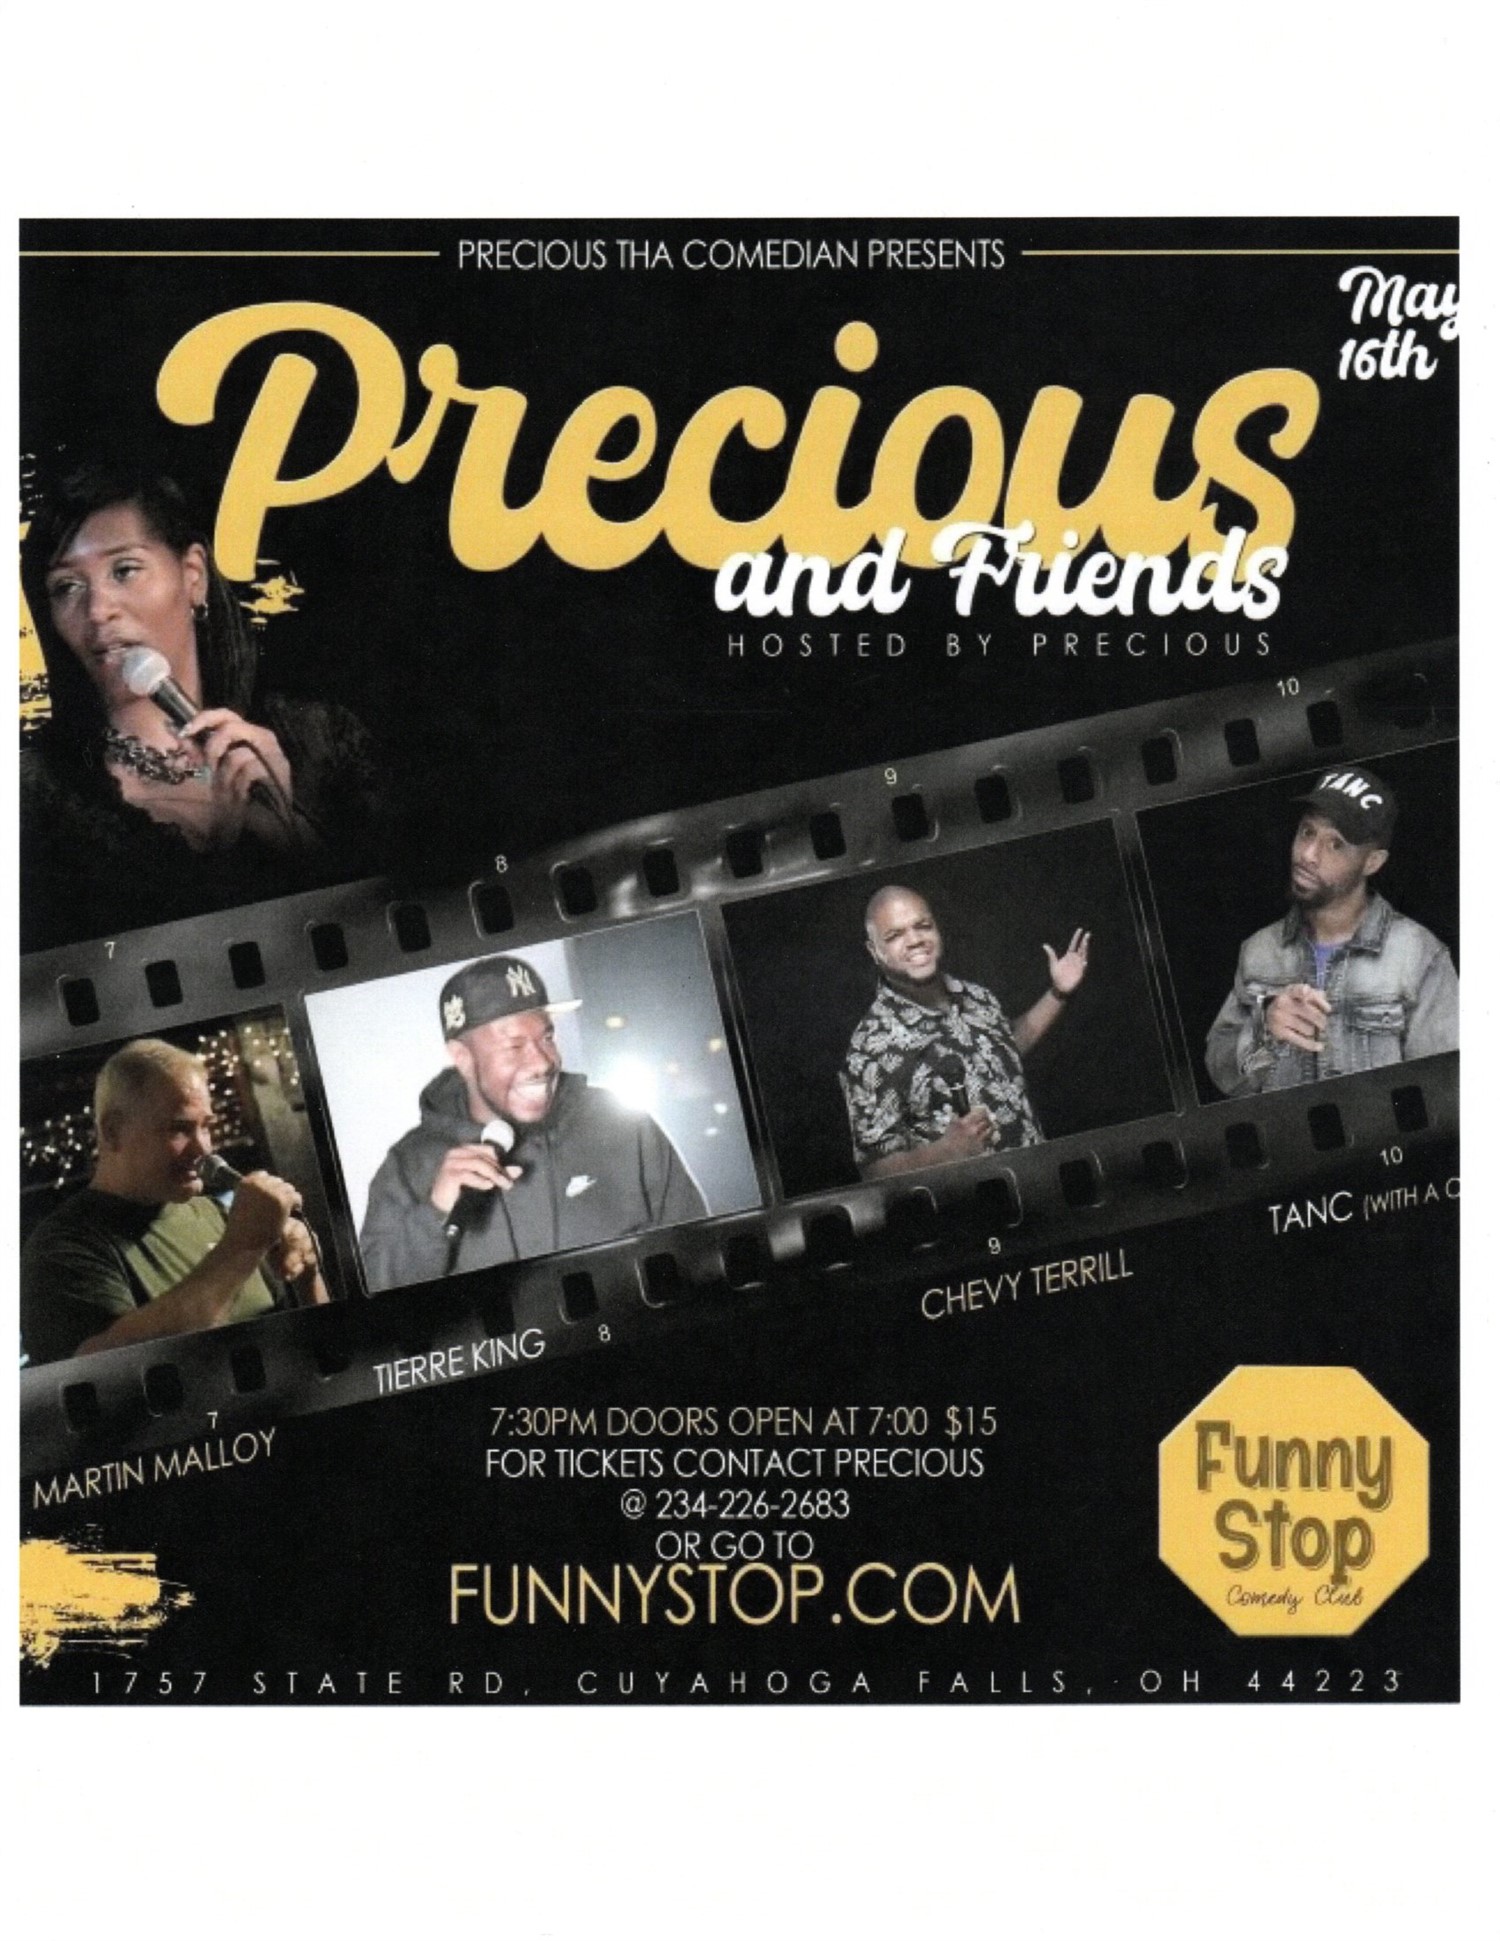 Precious & Friends Funny Stop Comedy Club on mai 16, 20:00@Funny Stop Comedy Club - Achetez des billets et obtenez des informations surFunny Stop funnystop.online